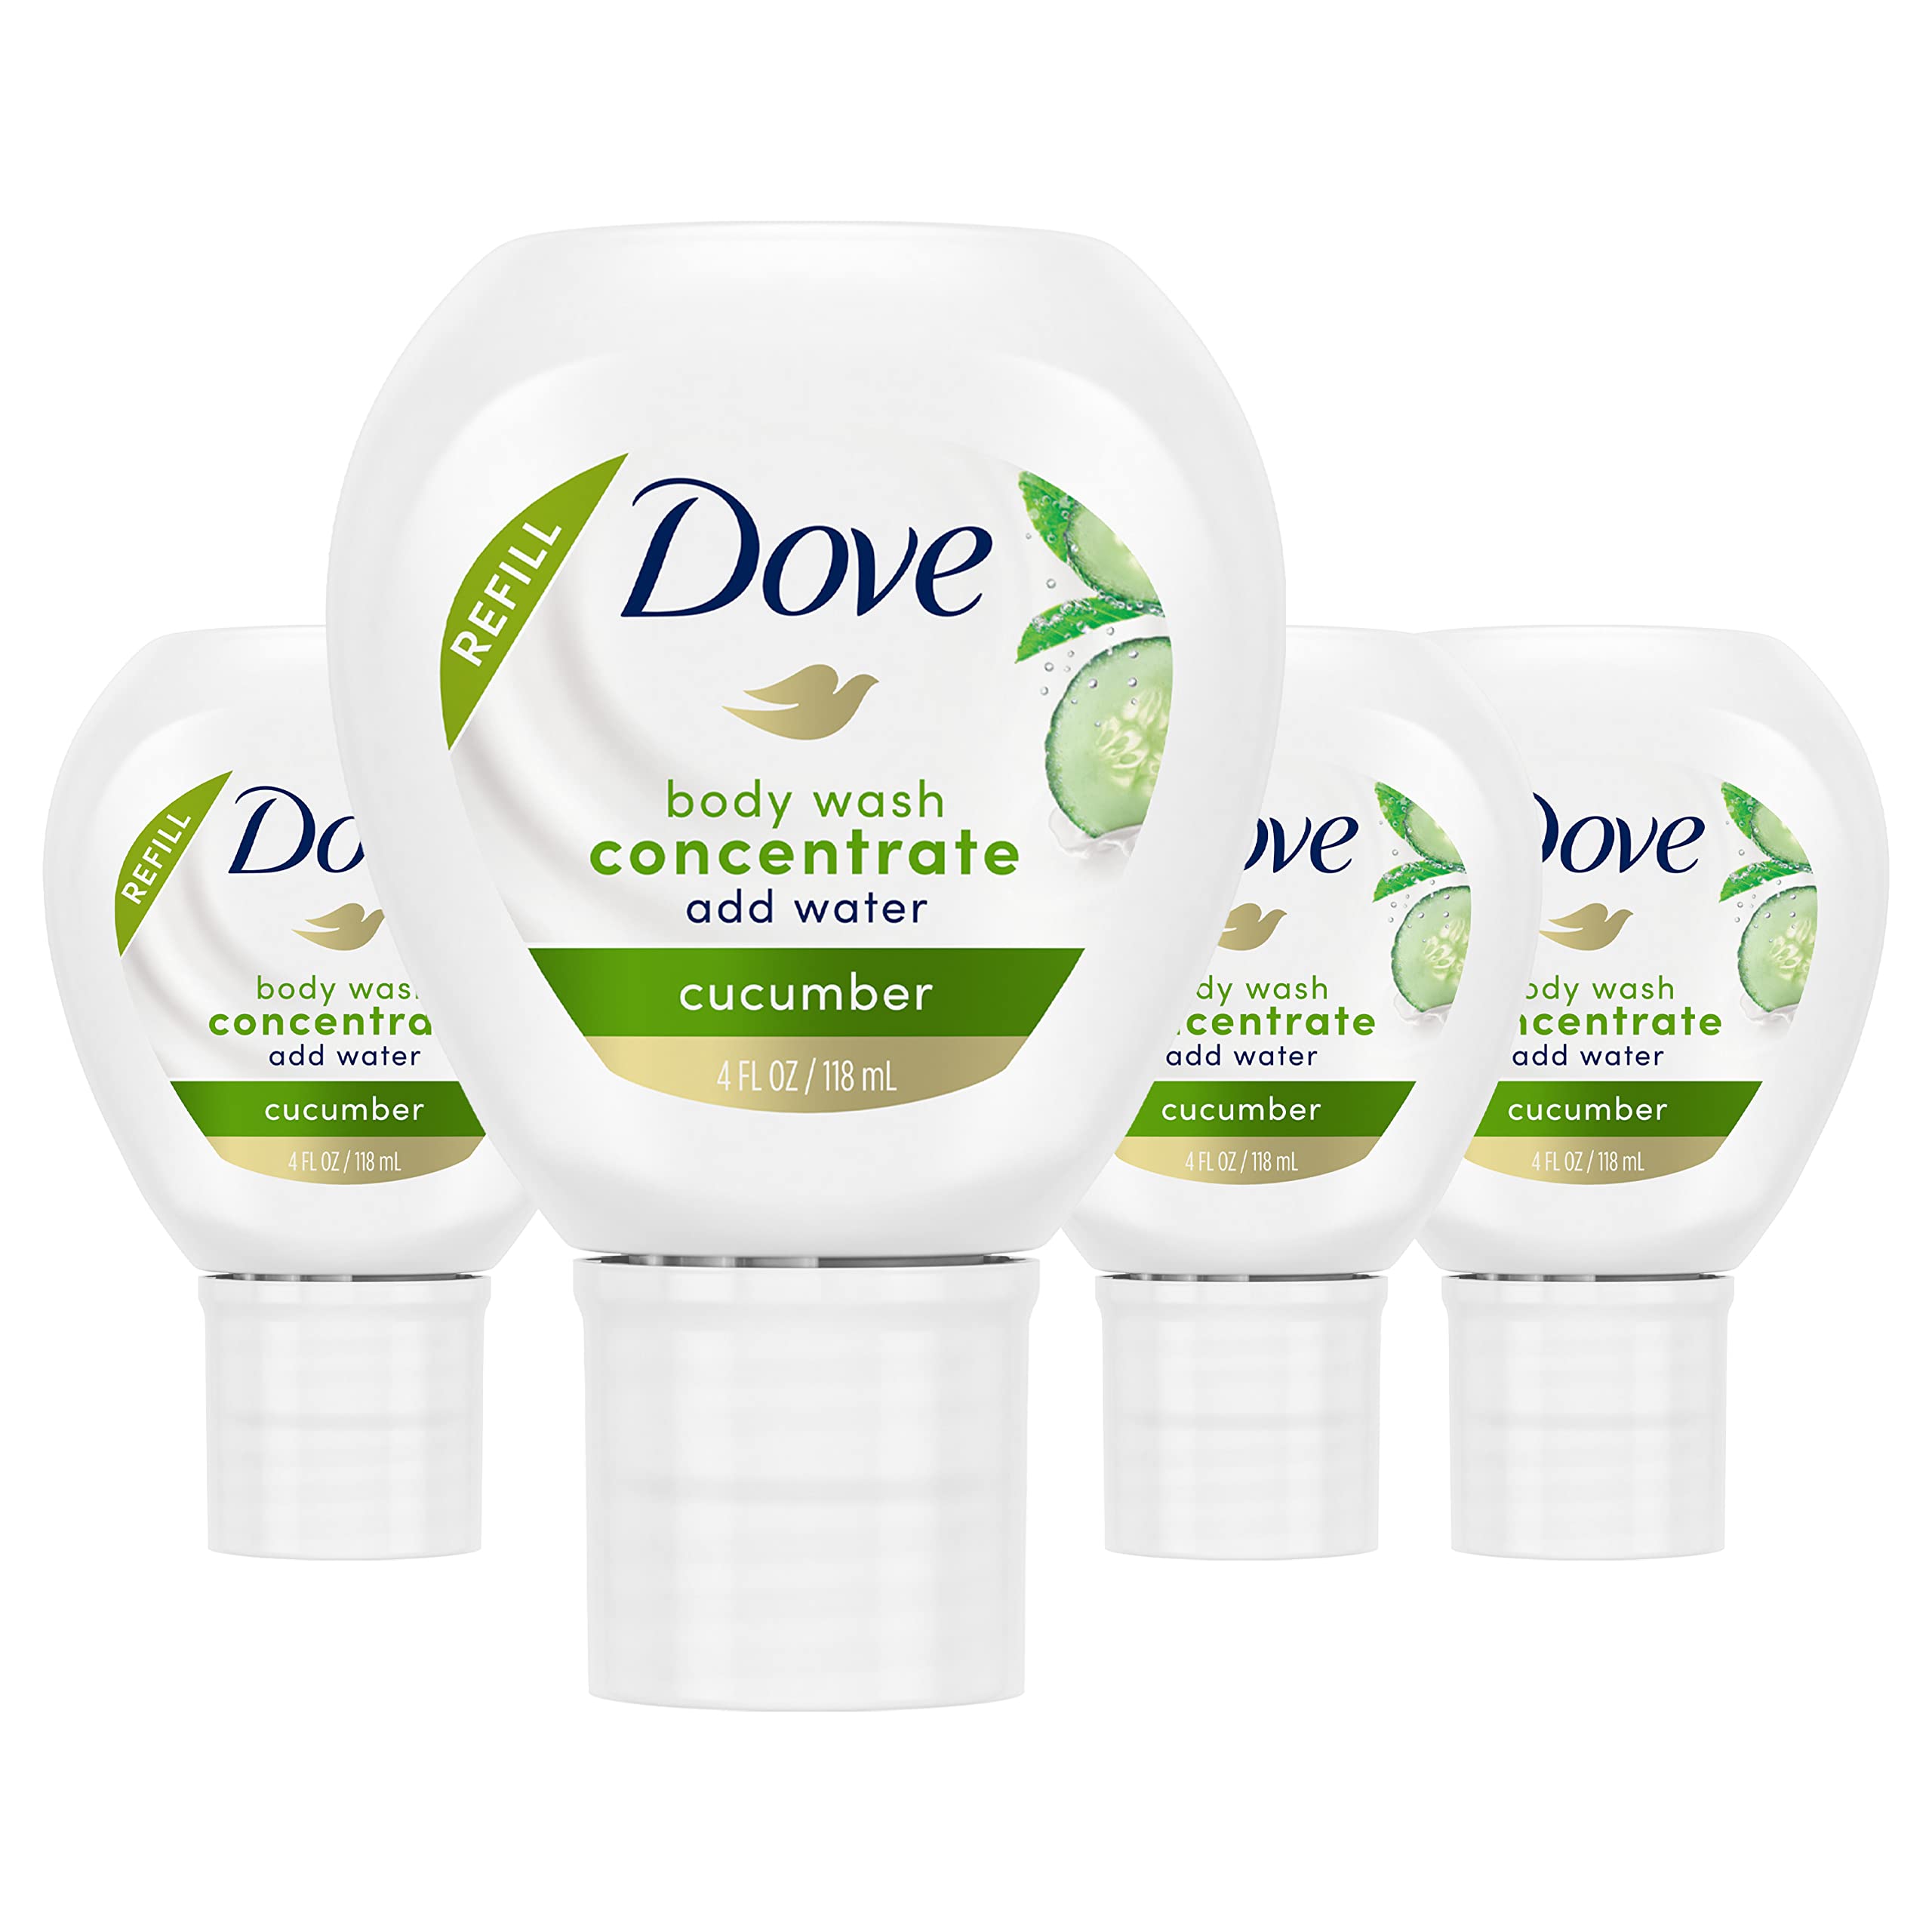 Dove Body Wash Concentrate Refill for use reusable bottle Cucumber for  Instantly Soft Skin and Lasting Nourishment 4 fl oz (makes 16 fl oz) 4 pack